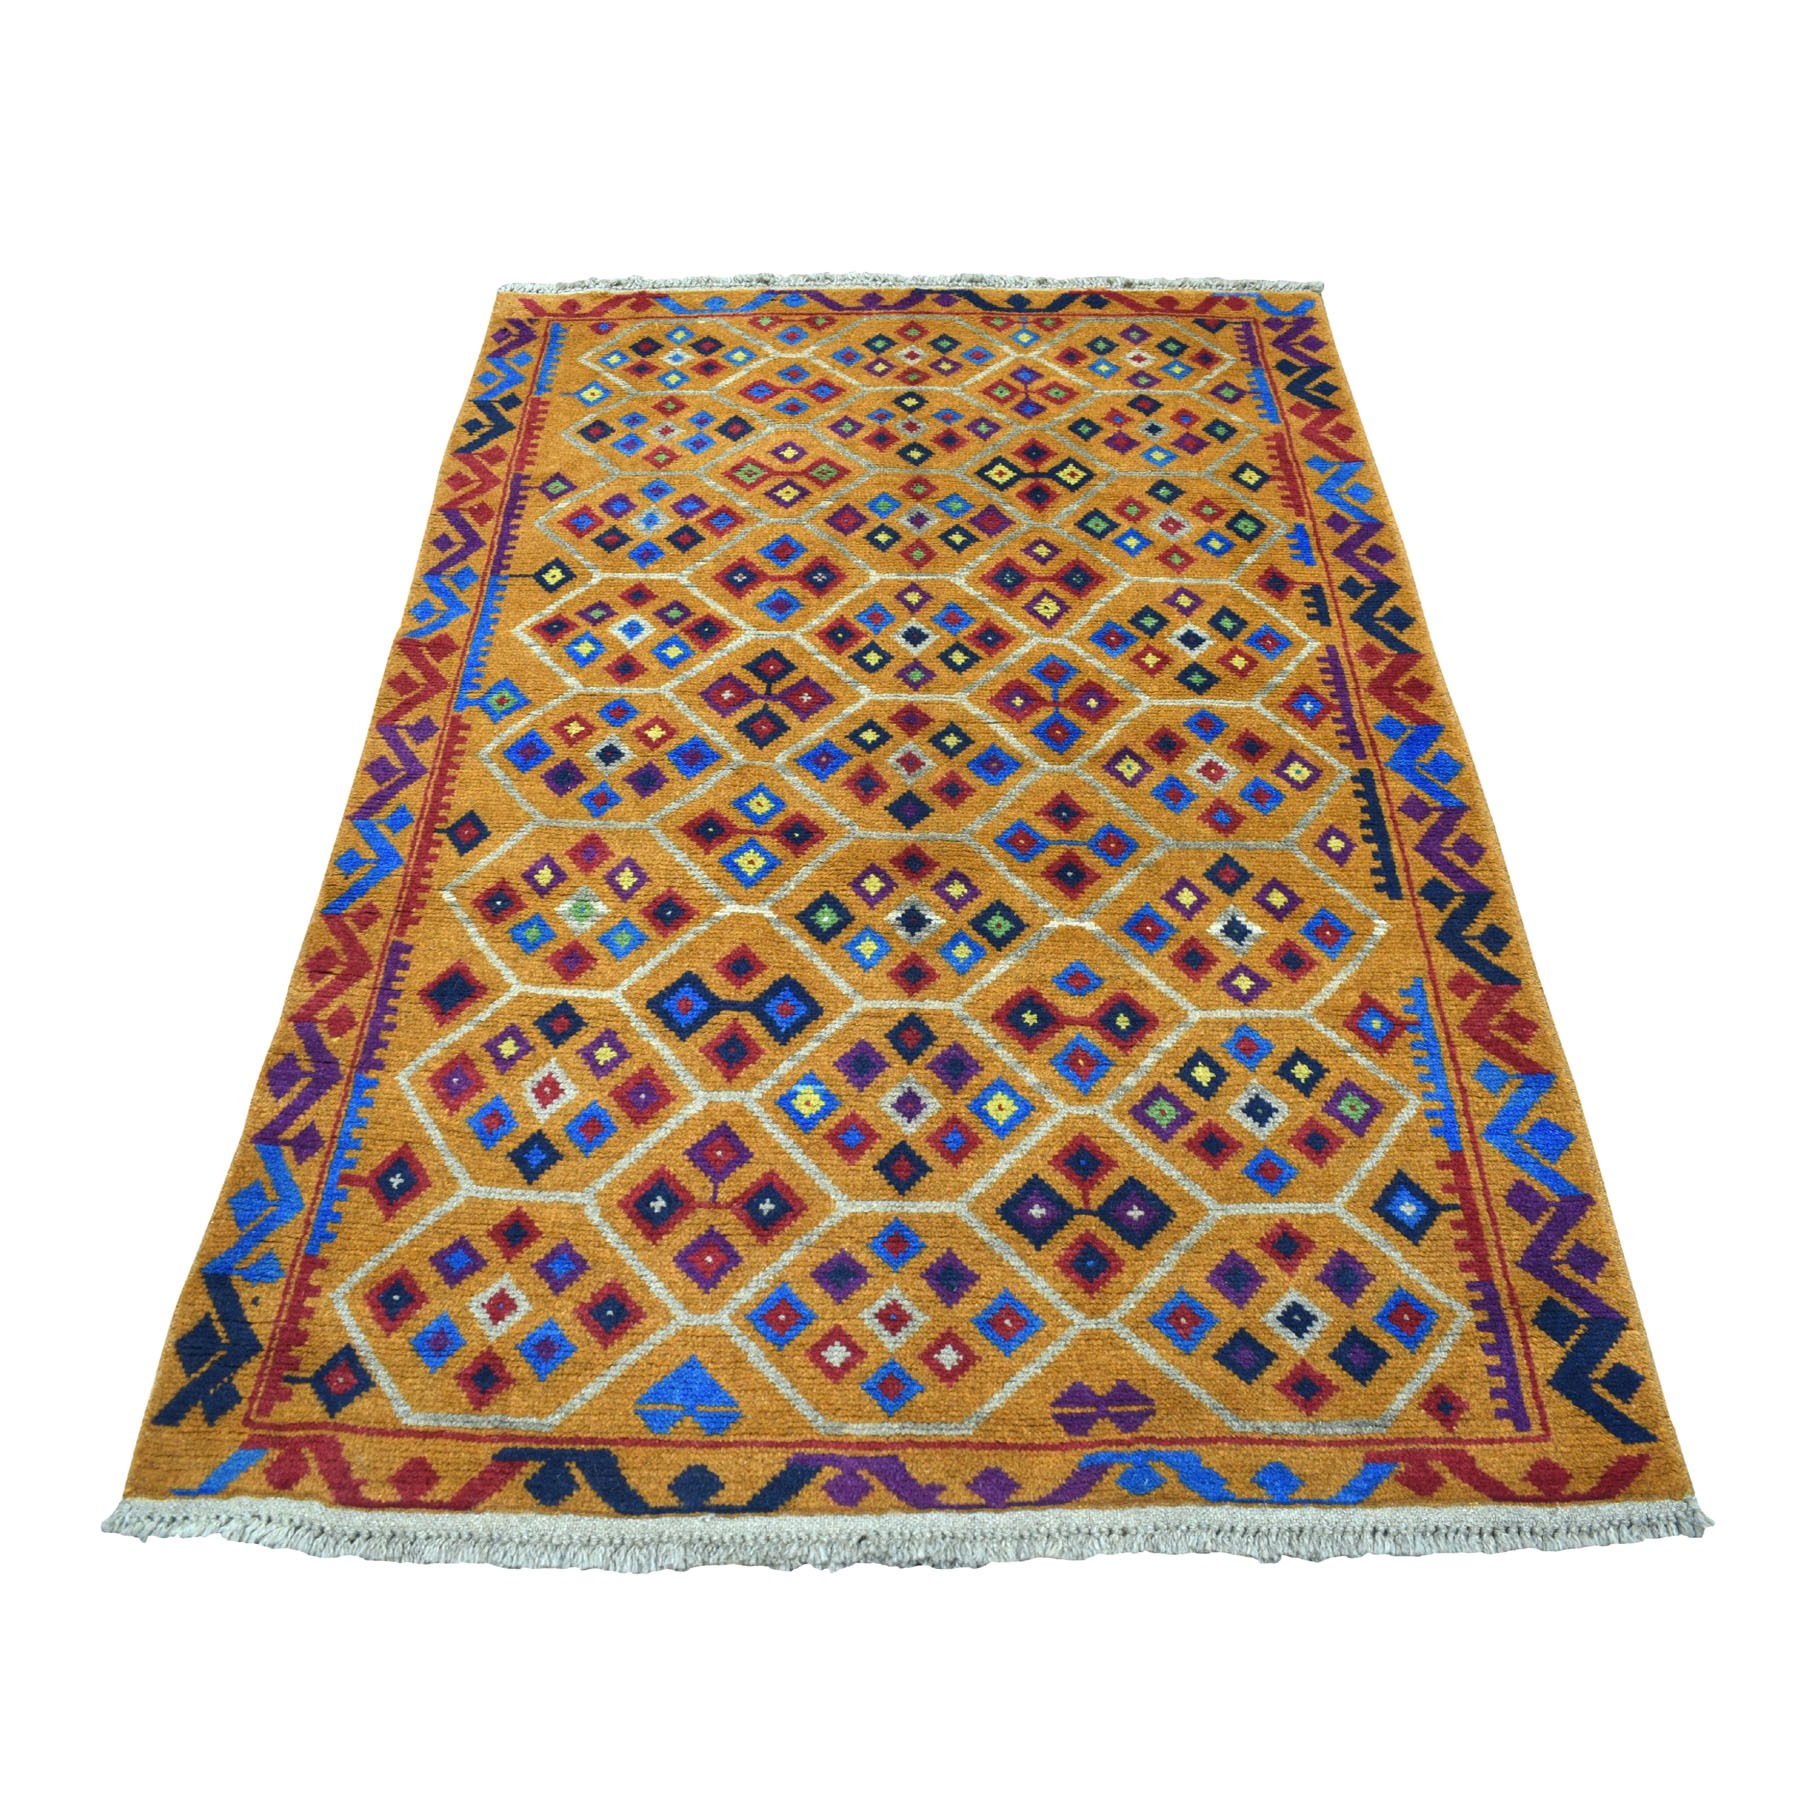 4'X5'10" Colorful Afghan Baluch Tribal Design Hand Knotted 100% Wool Oriental Rug moaeca8b